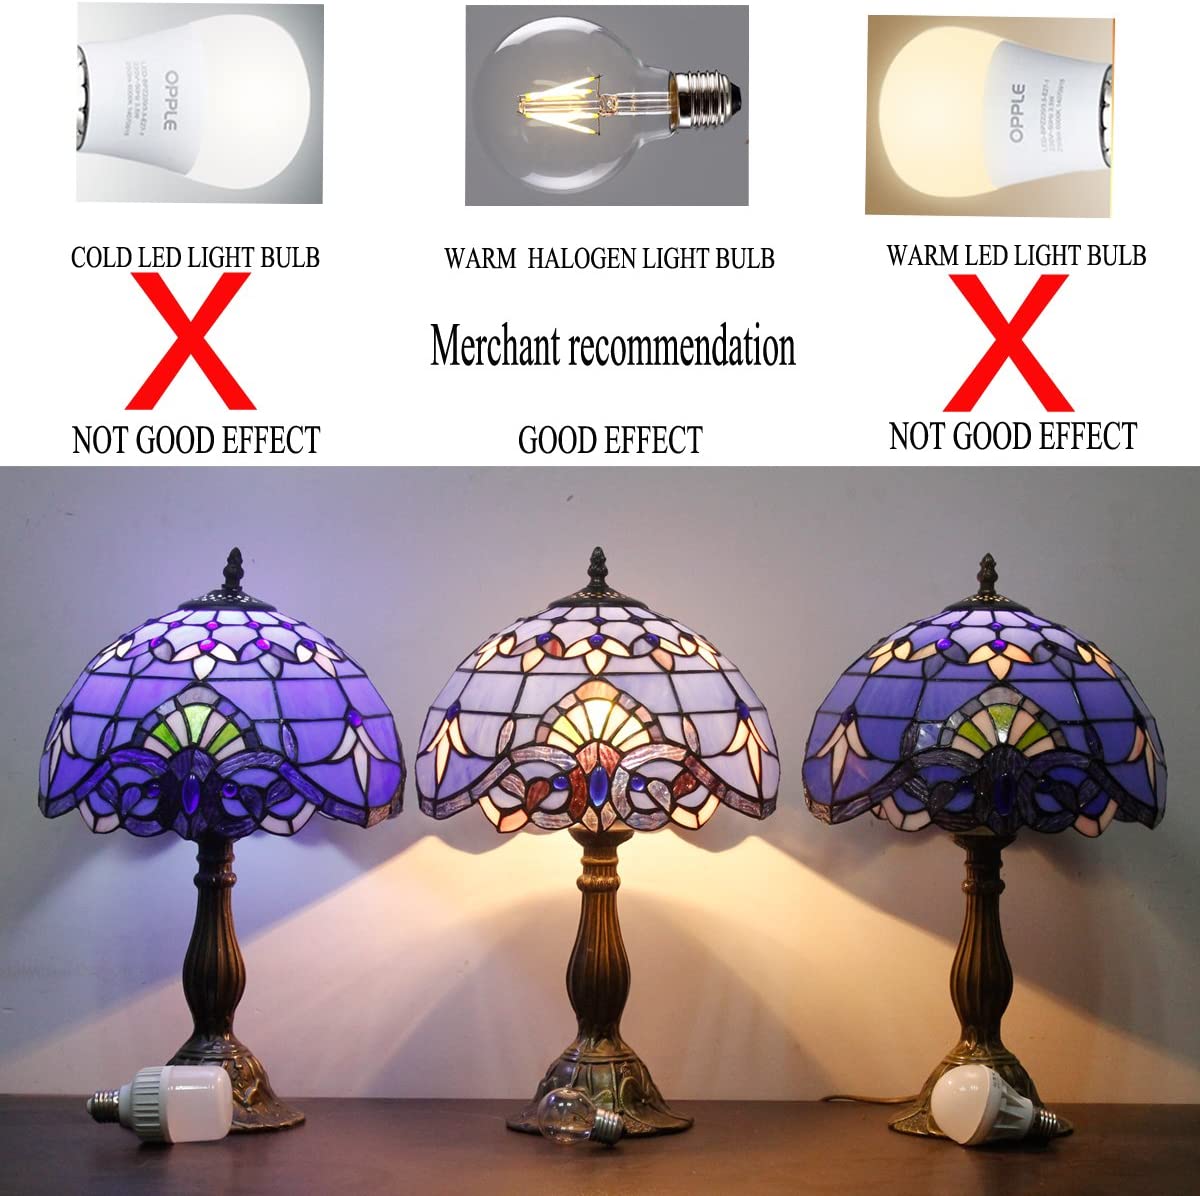 SHADY  Lamp Stained Glass Table Lamp 12X12X18 Inches Blue  Baroque Style Lavender Bedside Reading Desk Light Decor Bedroom Living Room Home Office S003C Series